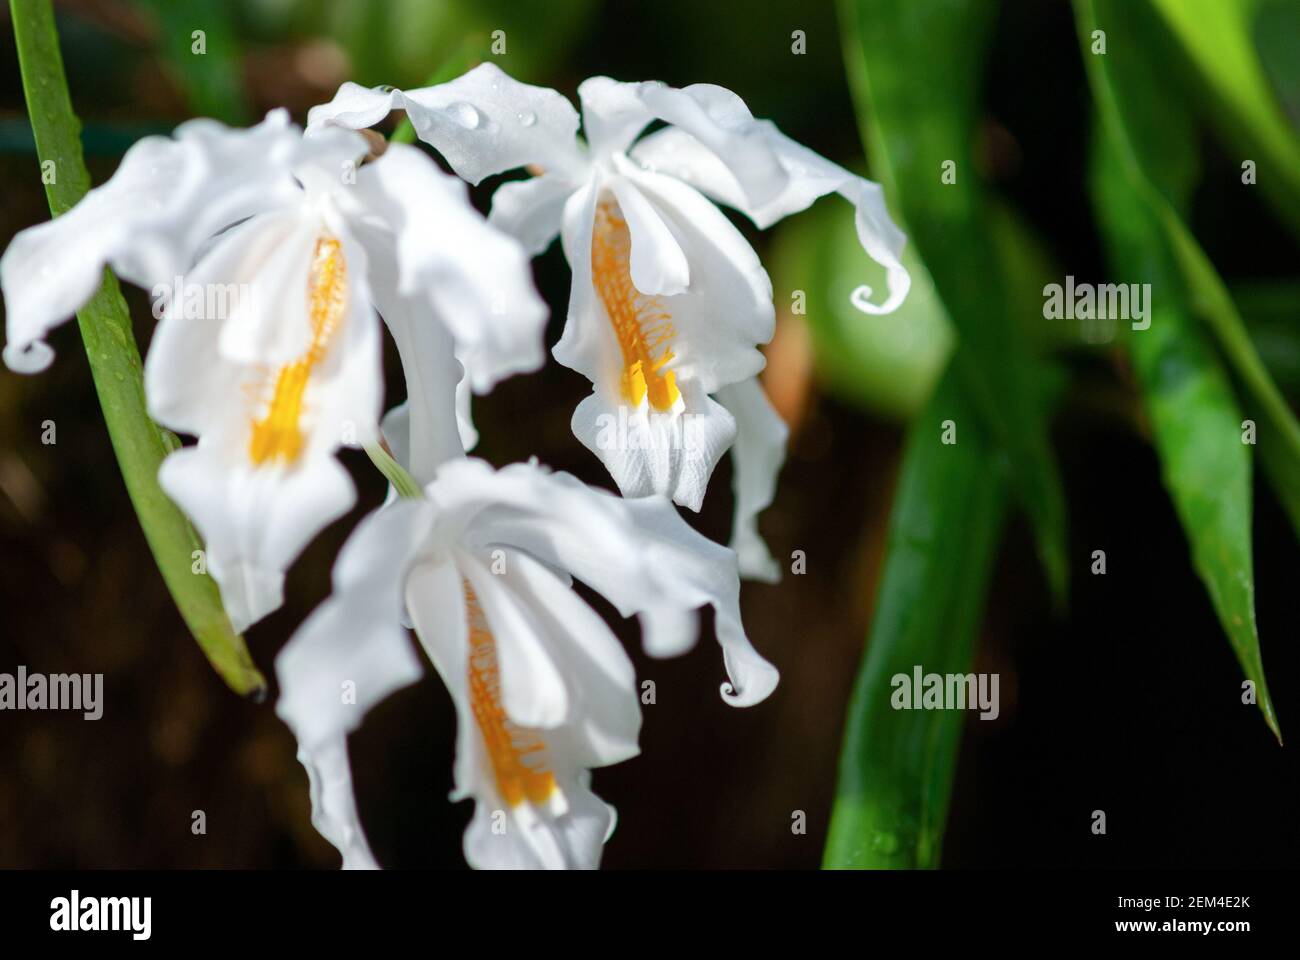 Coelogyne cristata (Crested Coelogyne) white orchid flowers, Eastern Himalayan orchid closeup Stock Photo